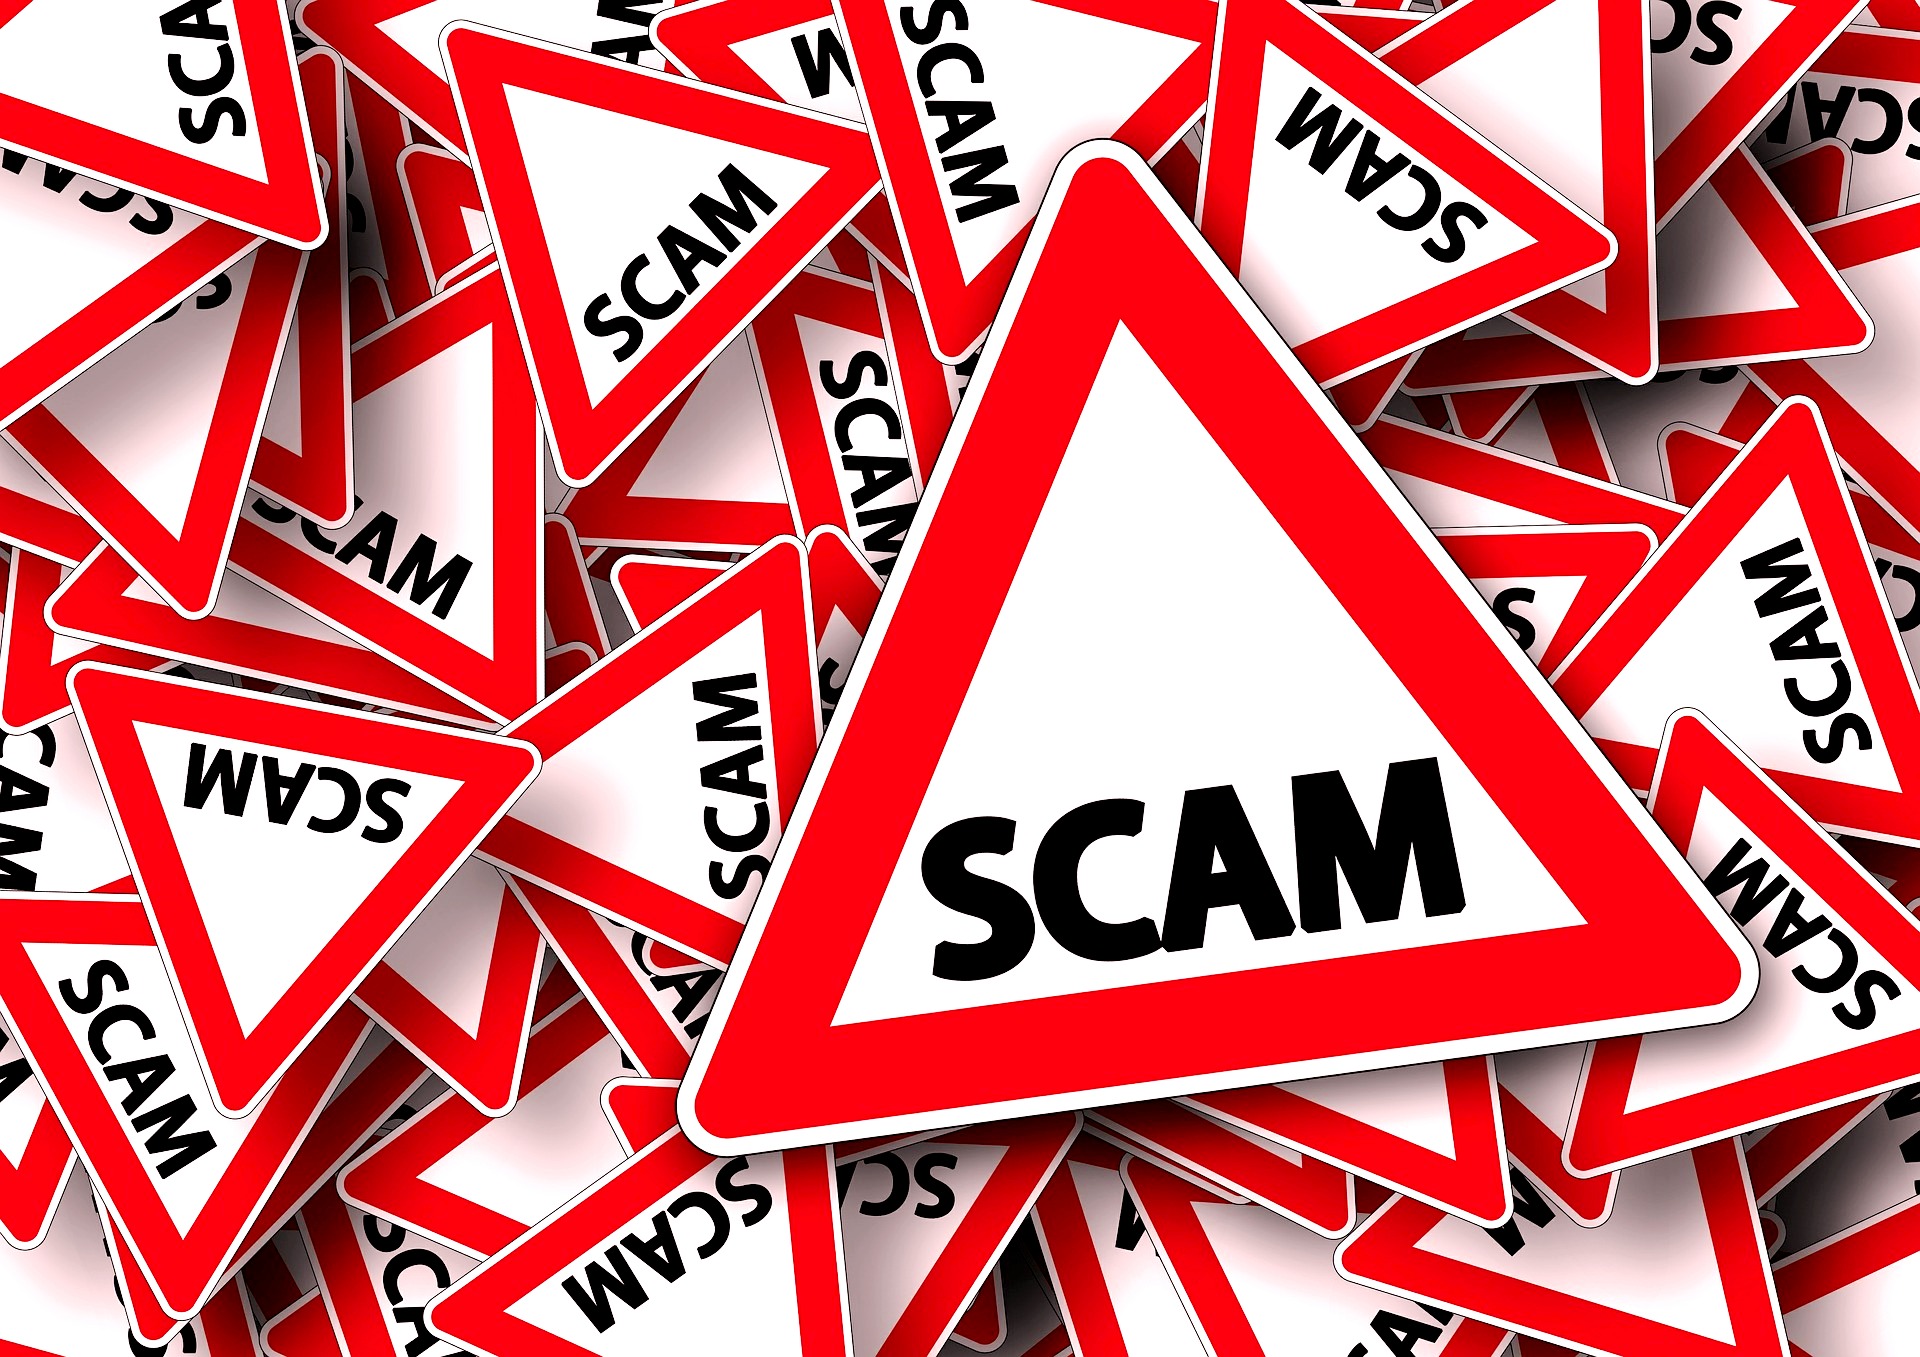 Beware! Scammers are doing this to Steal your Money Online